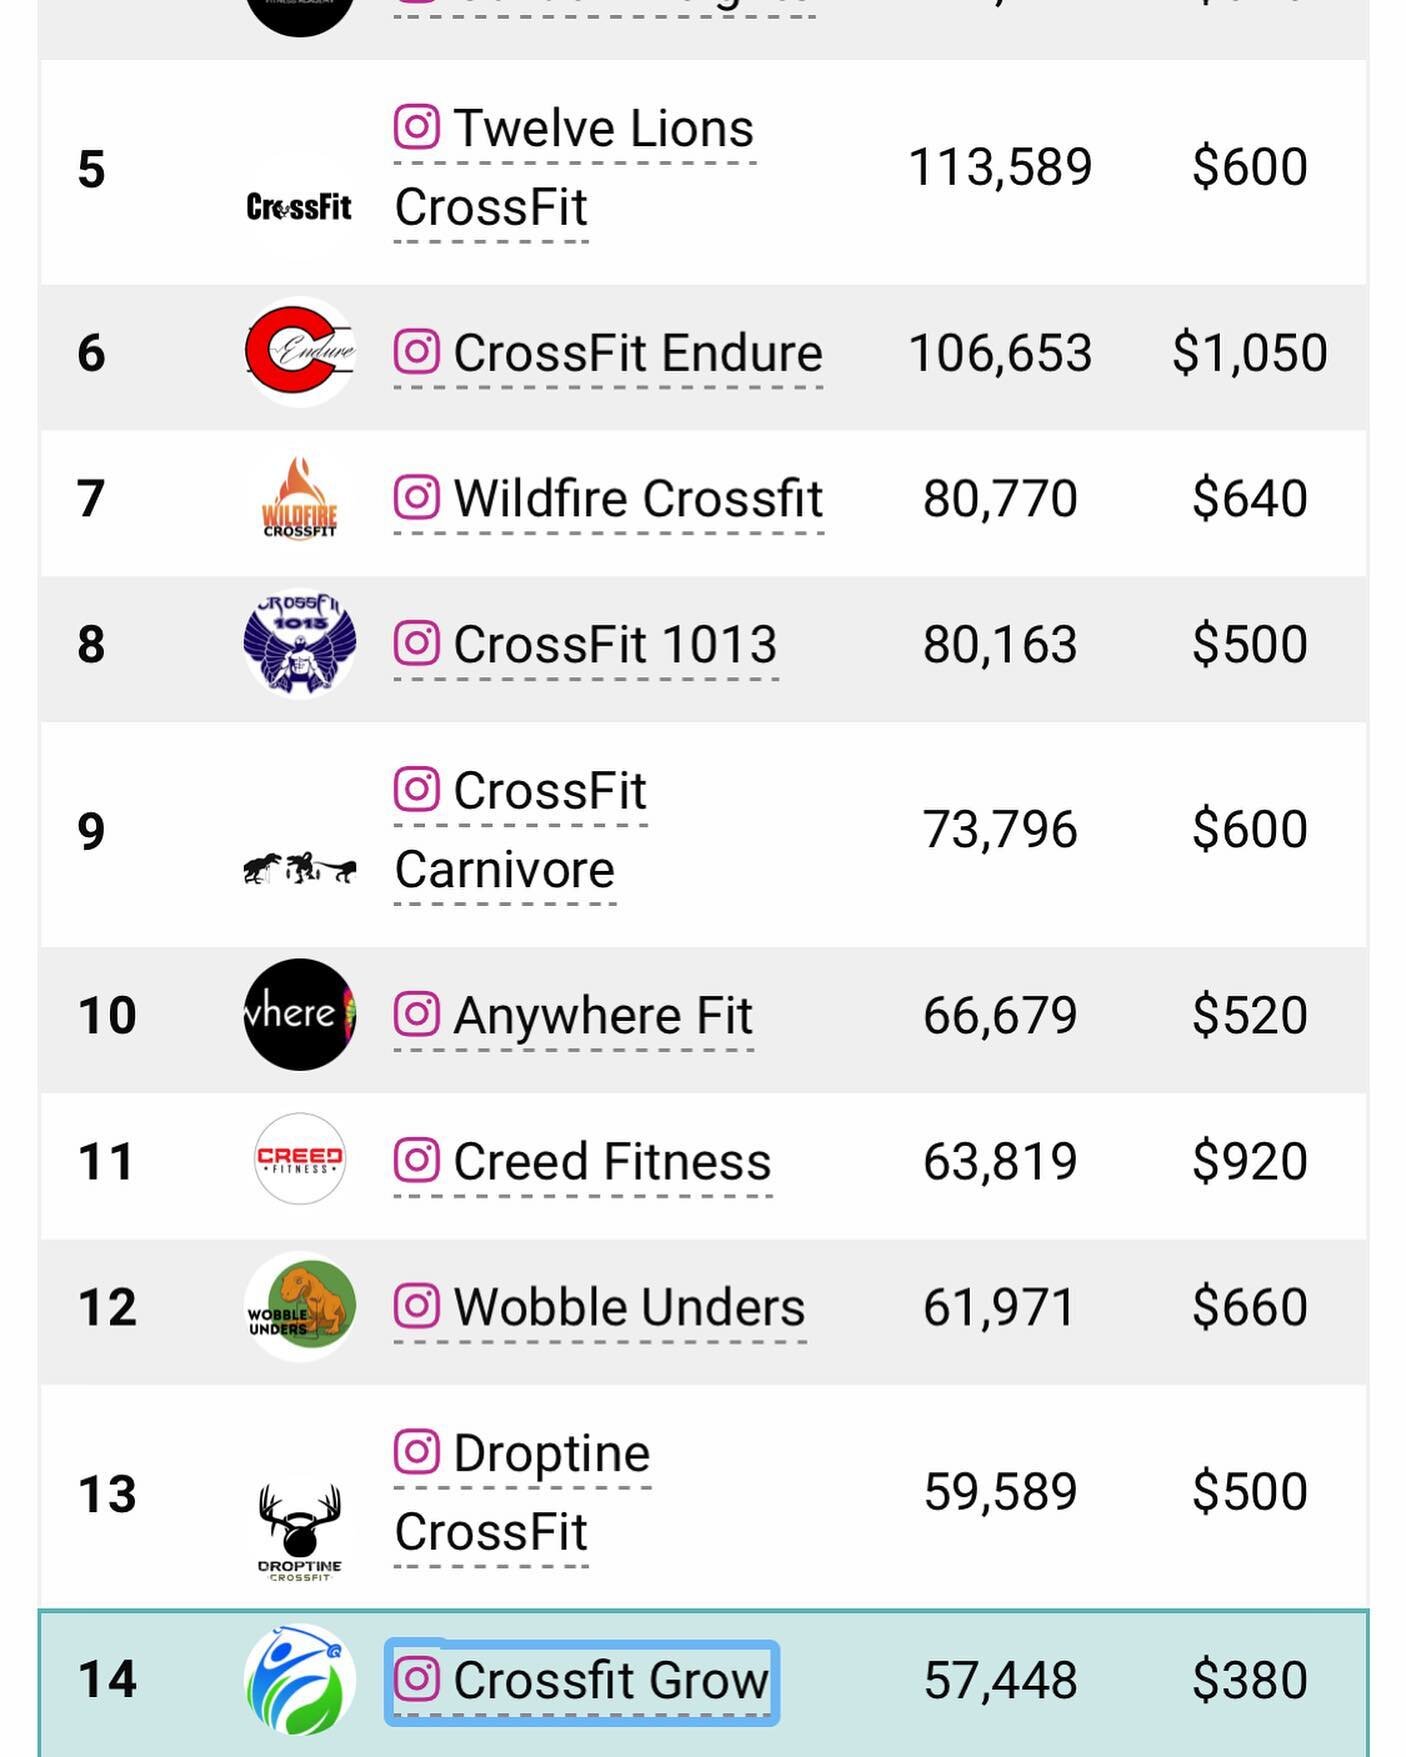 👏👏👏👏👏
So proud of the progress CF Grow is making in the RPM 10k Jump Challenge for at risk youth! With a much smaller team than most, we are hanging in the top 15!!! Out of 300+ teams! 💪💪
Wanna join us? It&rsquo;s not too late!
&mdash;&mdash;&